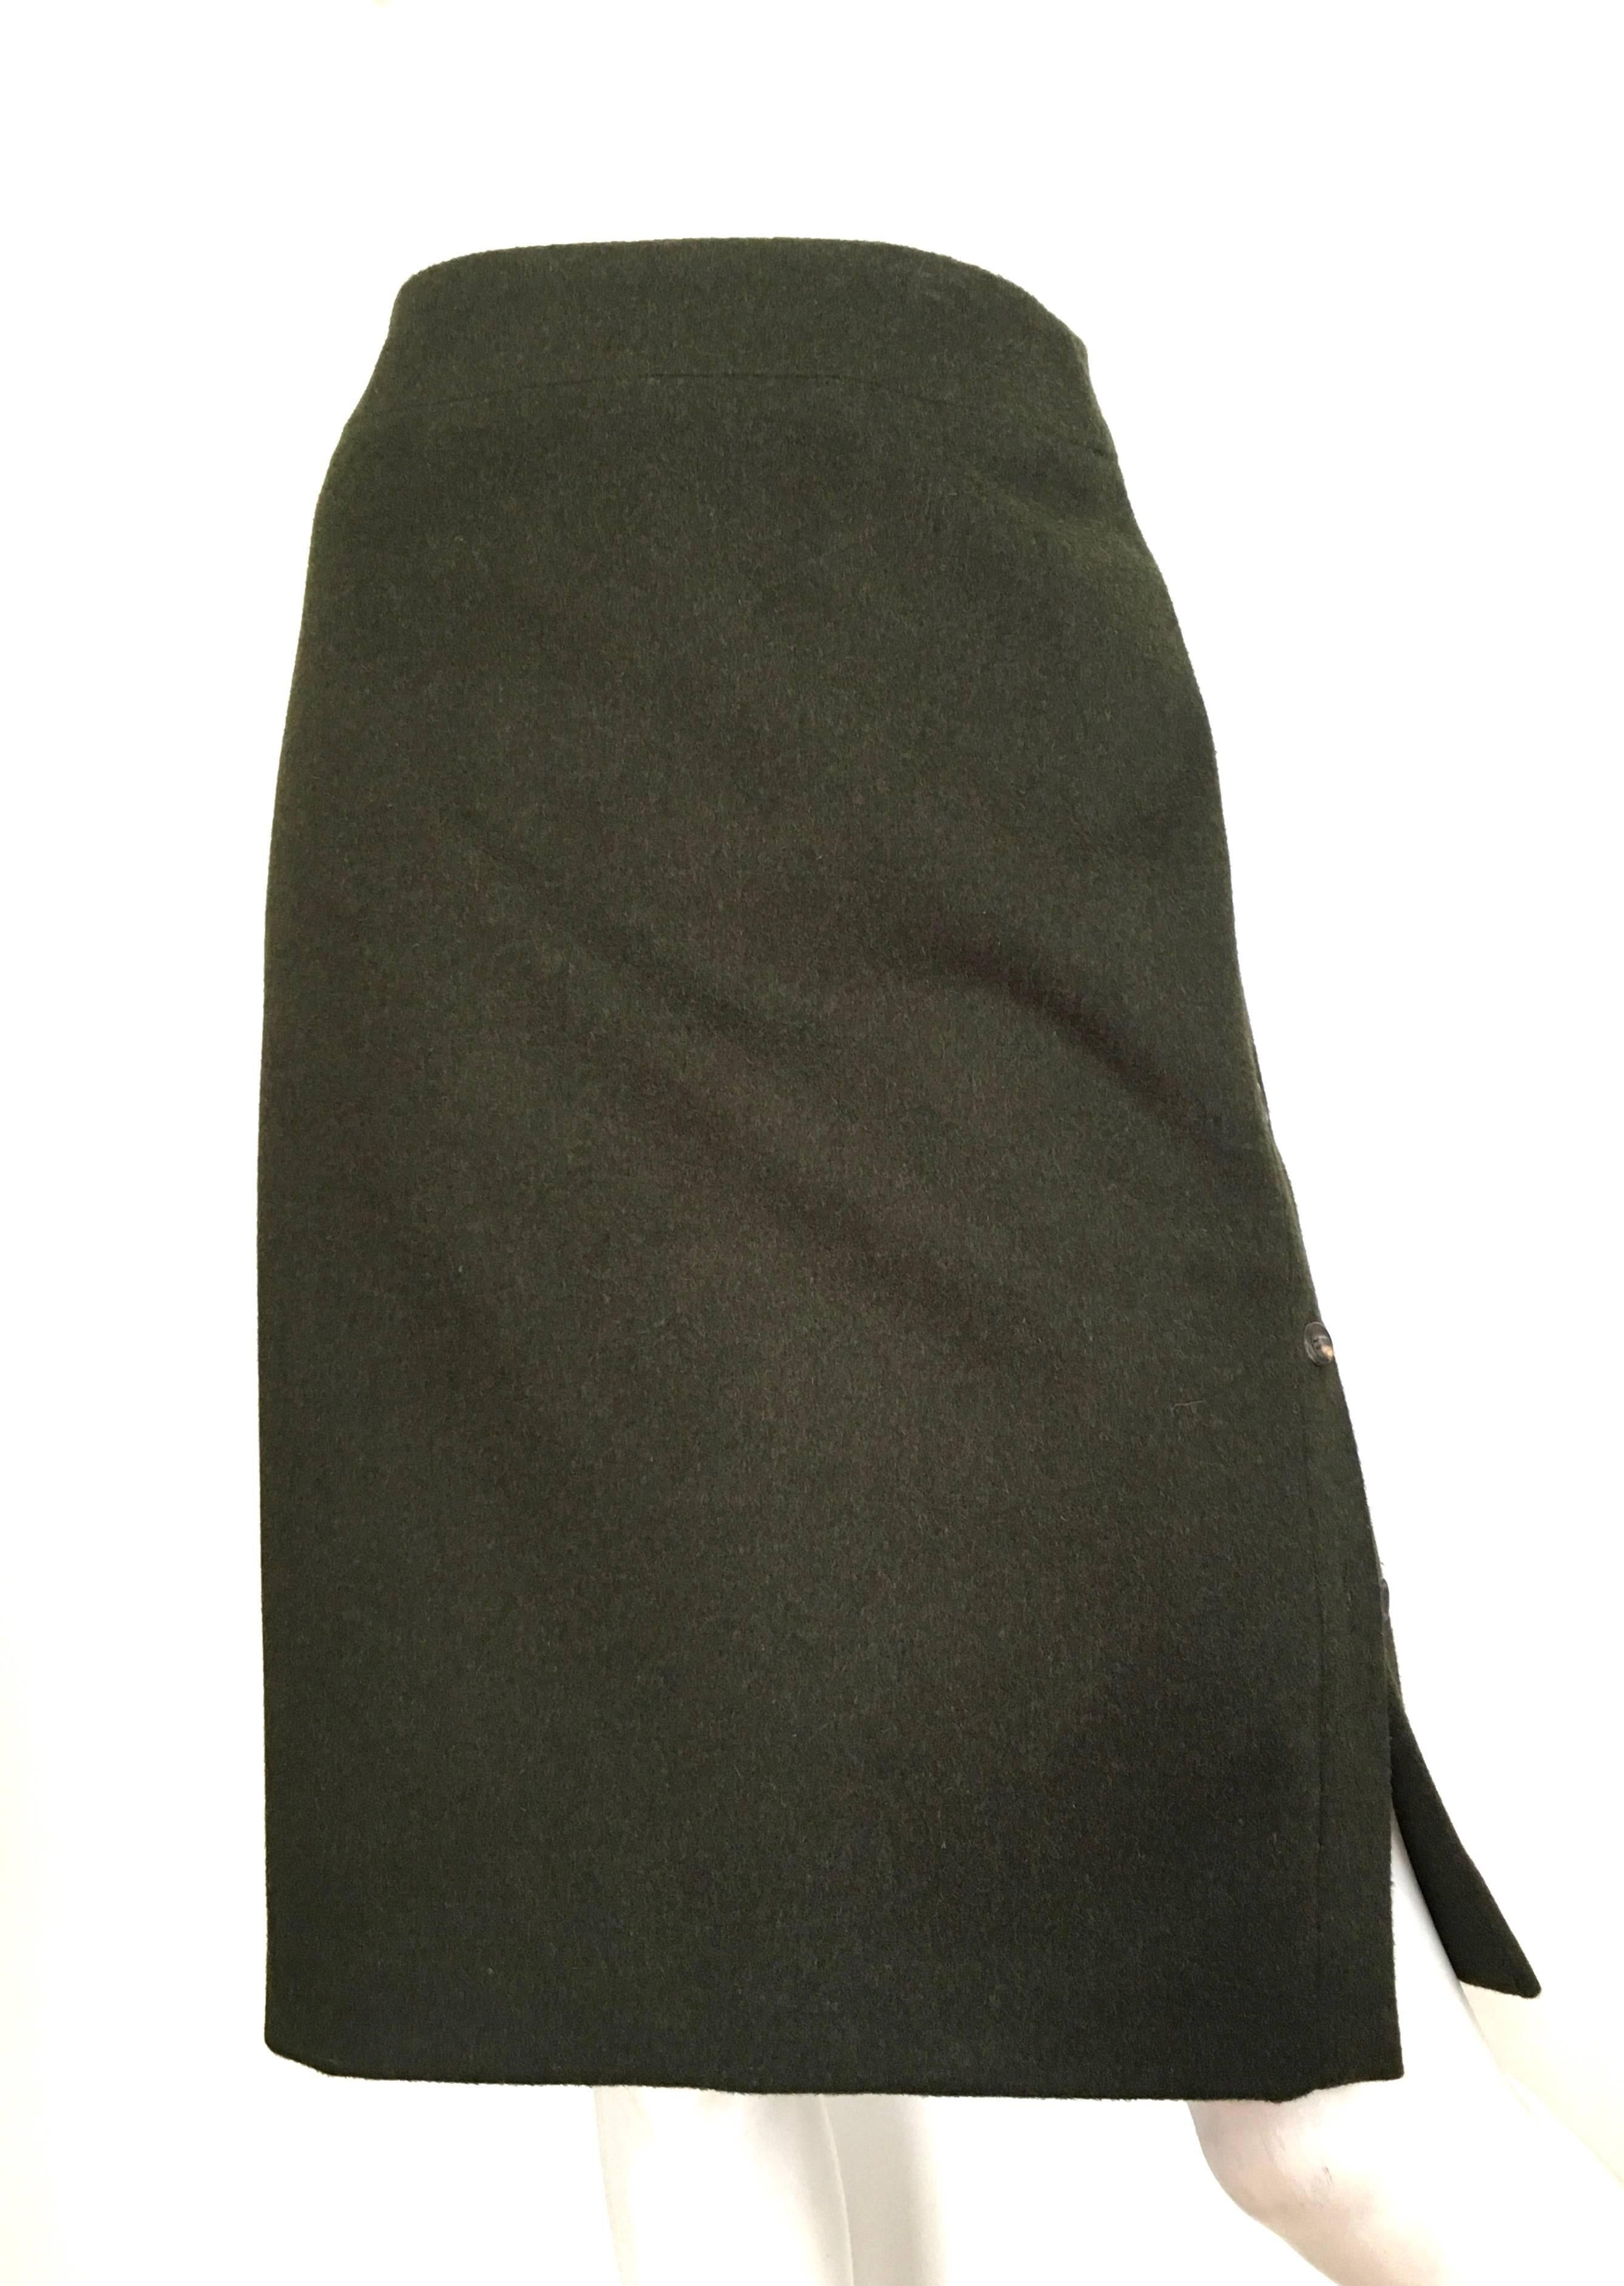 Carolina Herrera for Saks Olive Brushed Wool Skirt Size 10 Made in Italy. For Sale 4